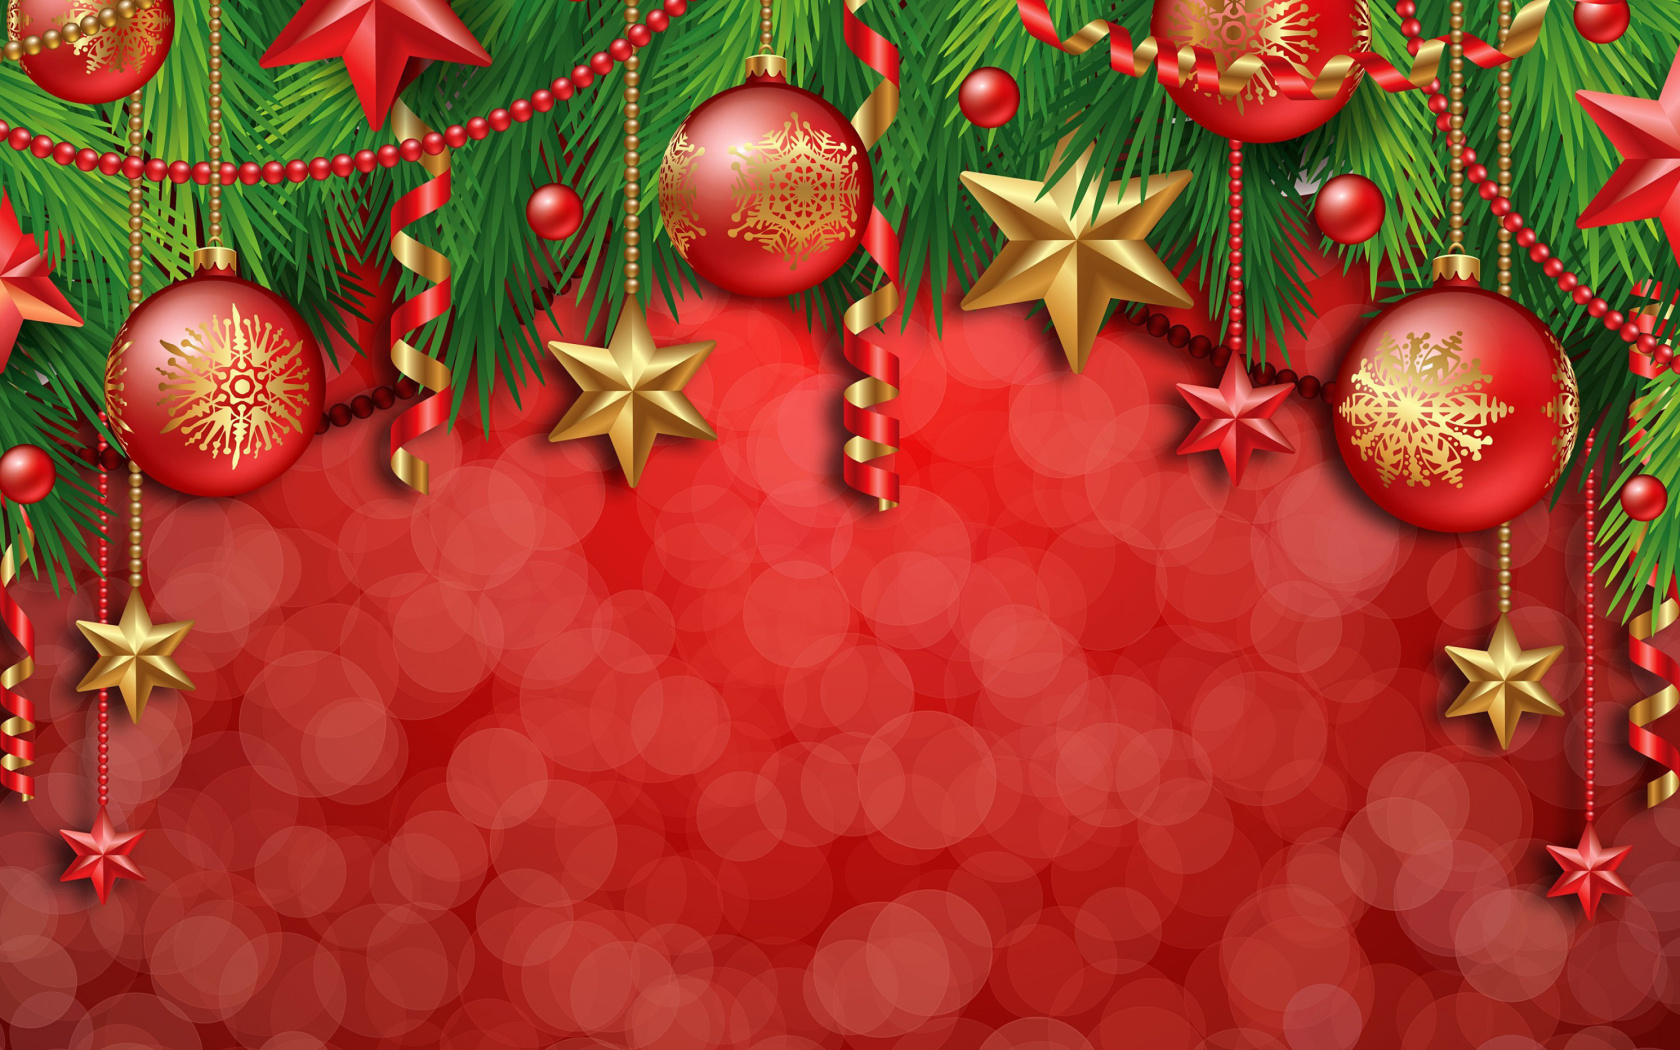 Red Christmas Decorations wallpaper 1680x1050